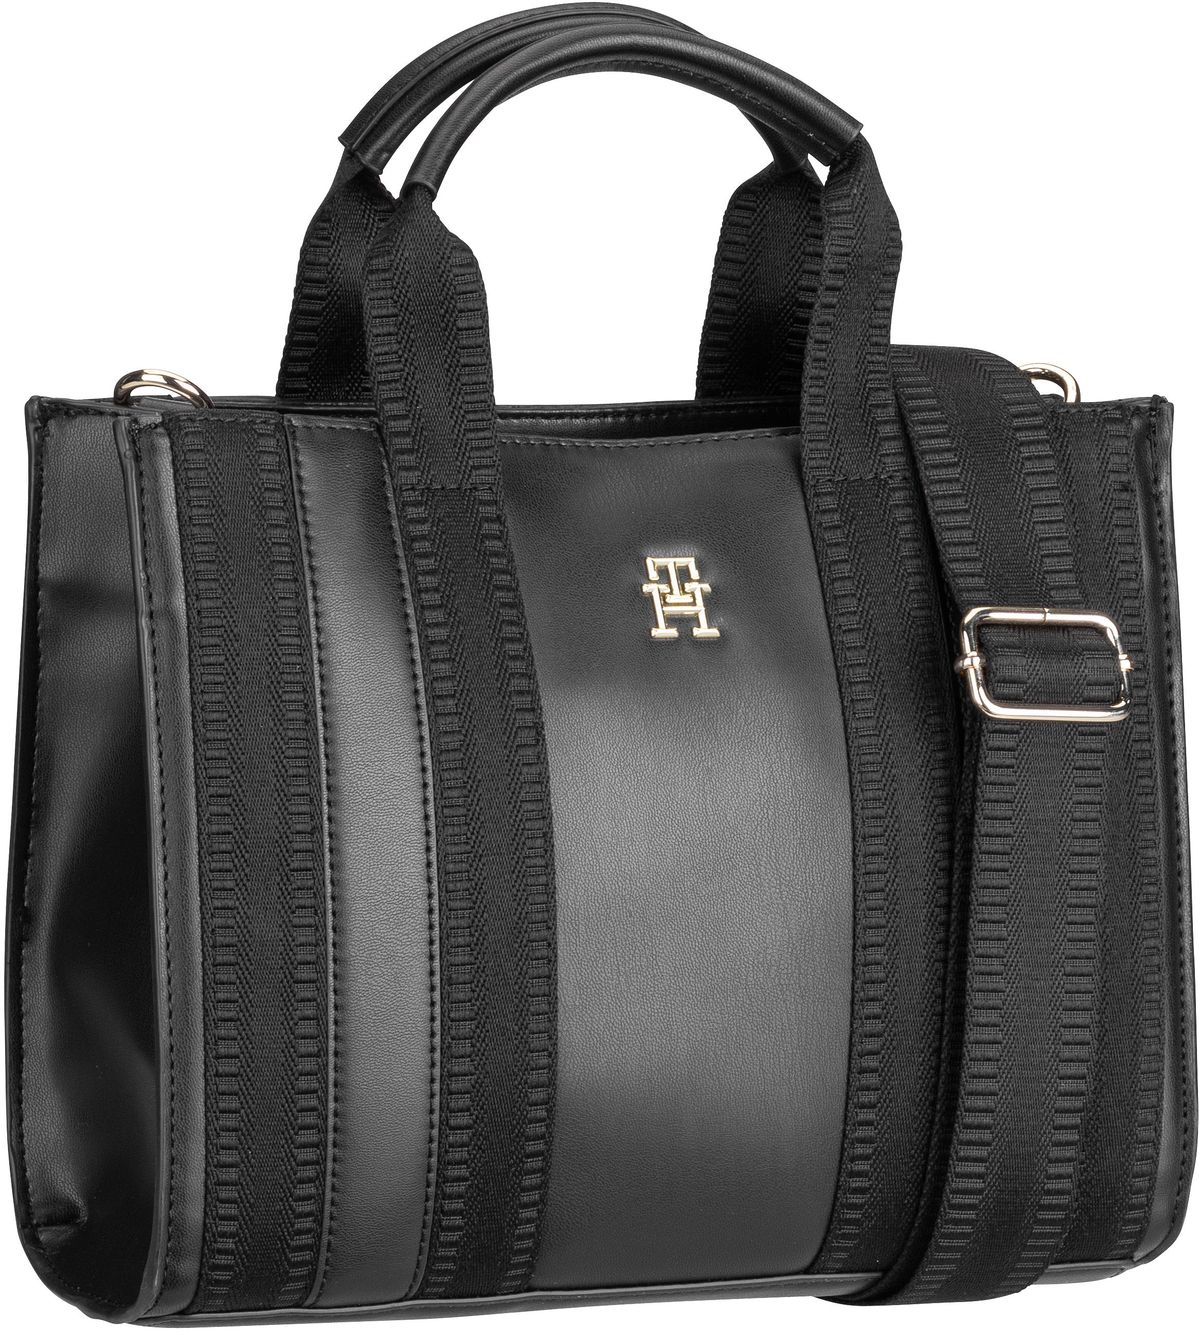 Tommy Hilfiger TH Identity Small Tote FA23  in Black (6.1 Liter), Handtasche